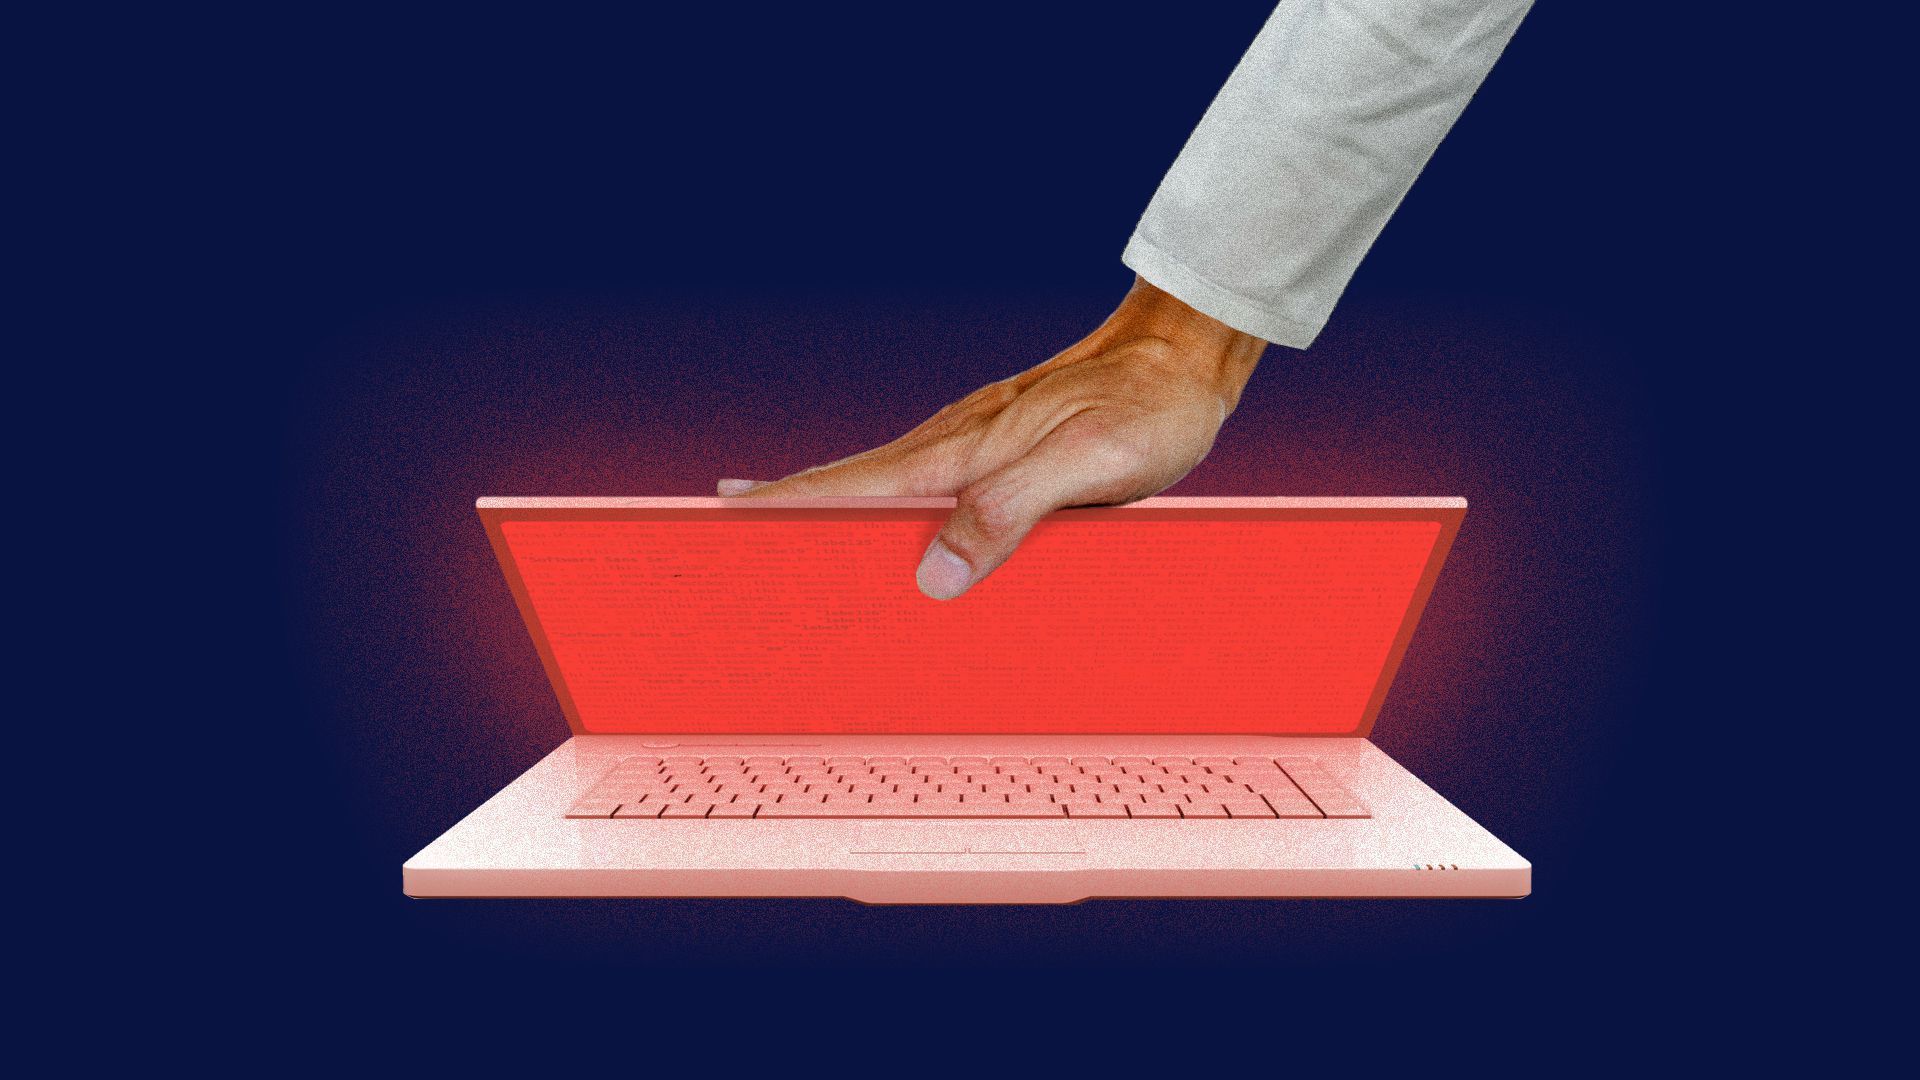 Illustration of a hand closing a laptop.